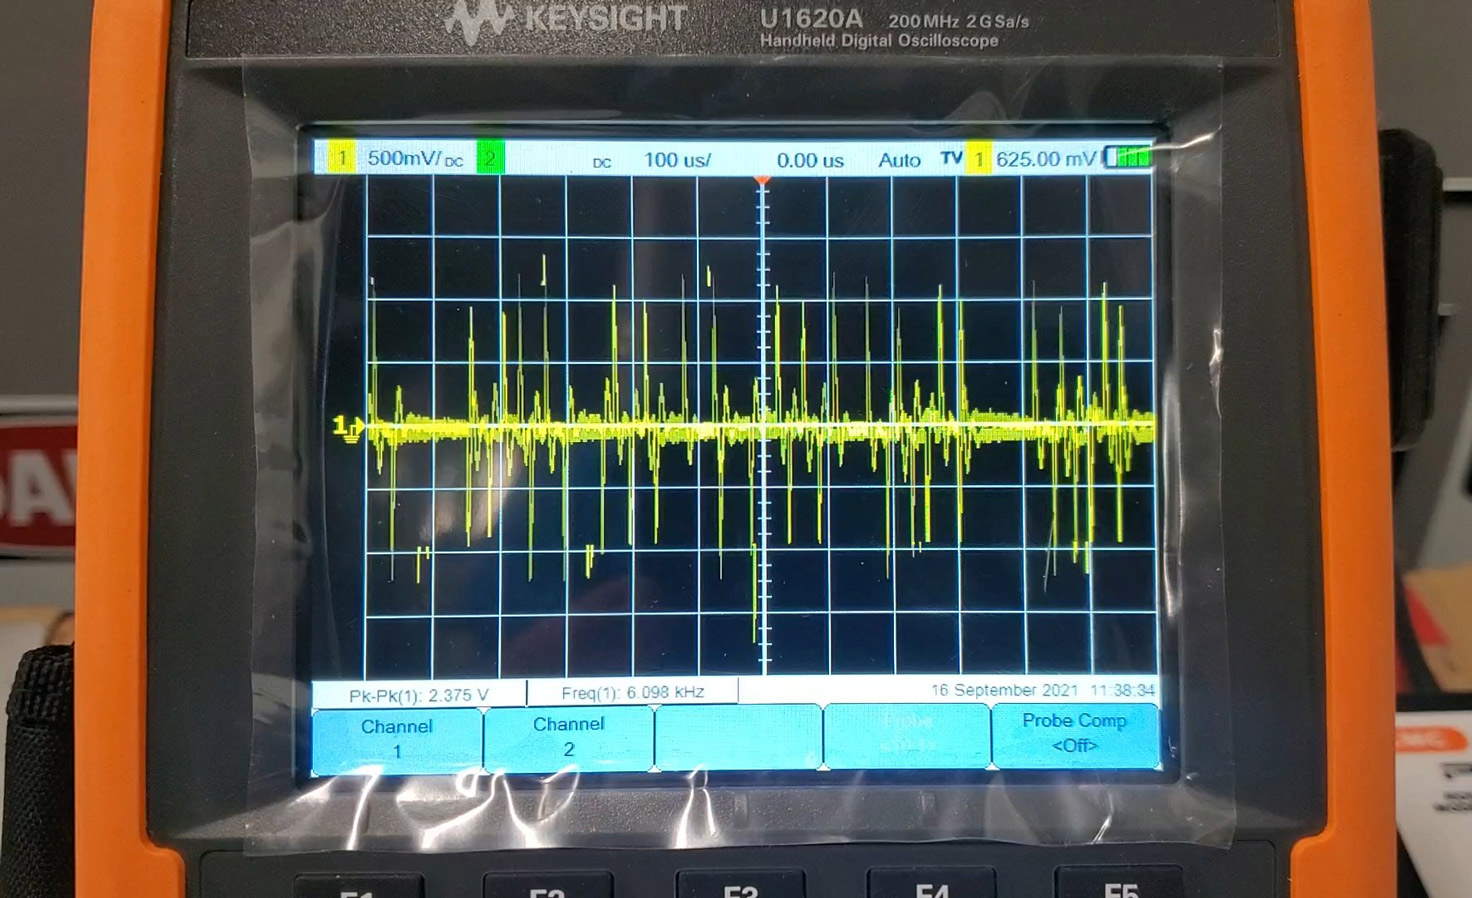 Electrical discharge levels seen on an Oscilloscope using Rogowski Coil helps determine potential shaft current issues